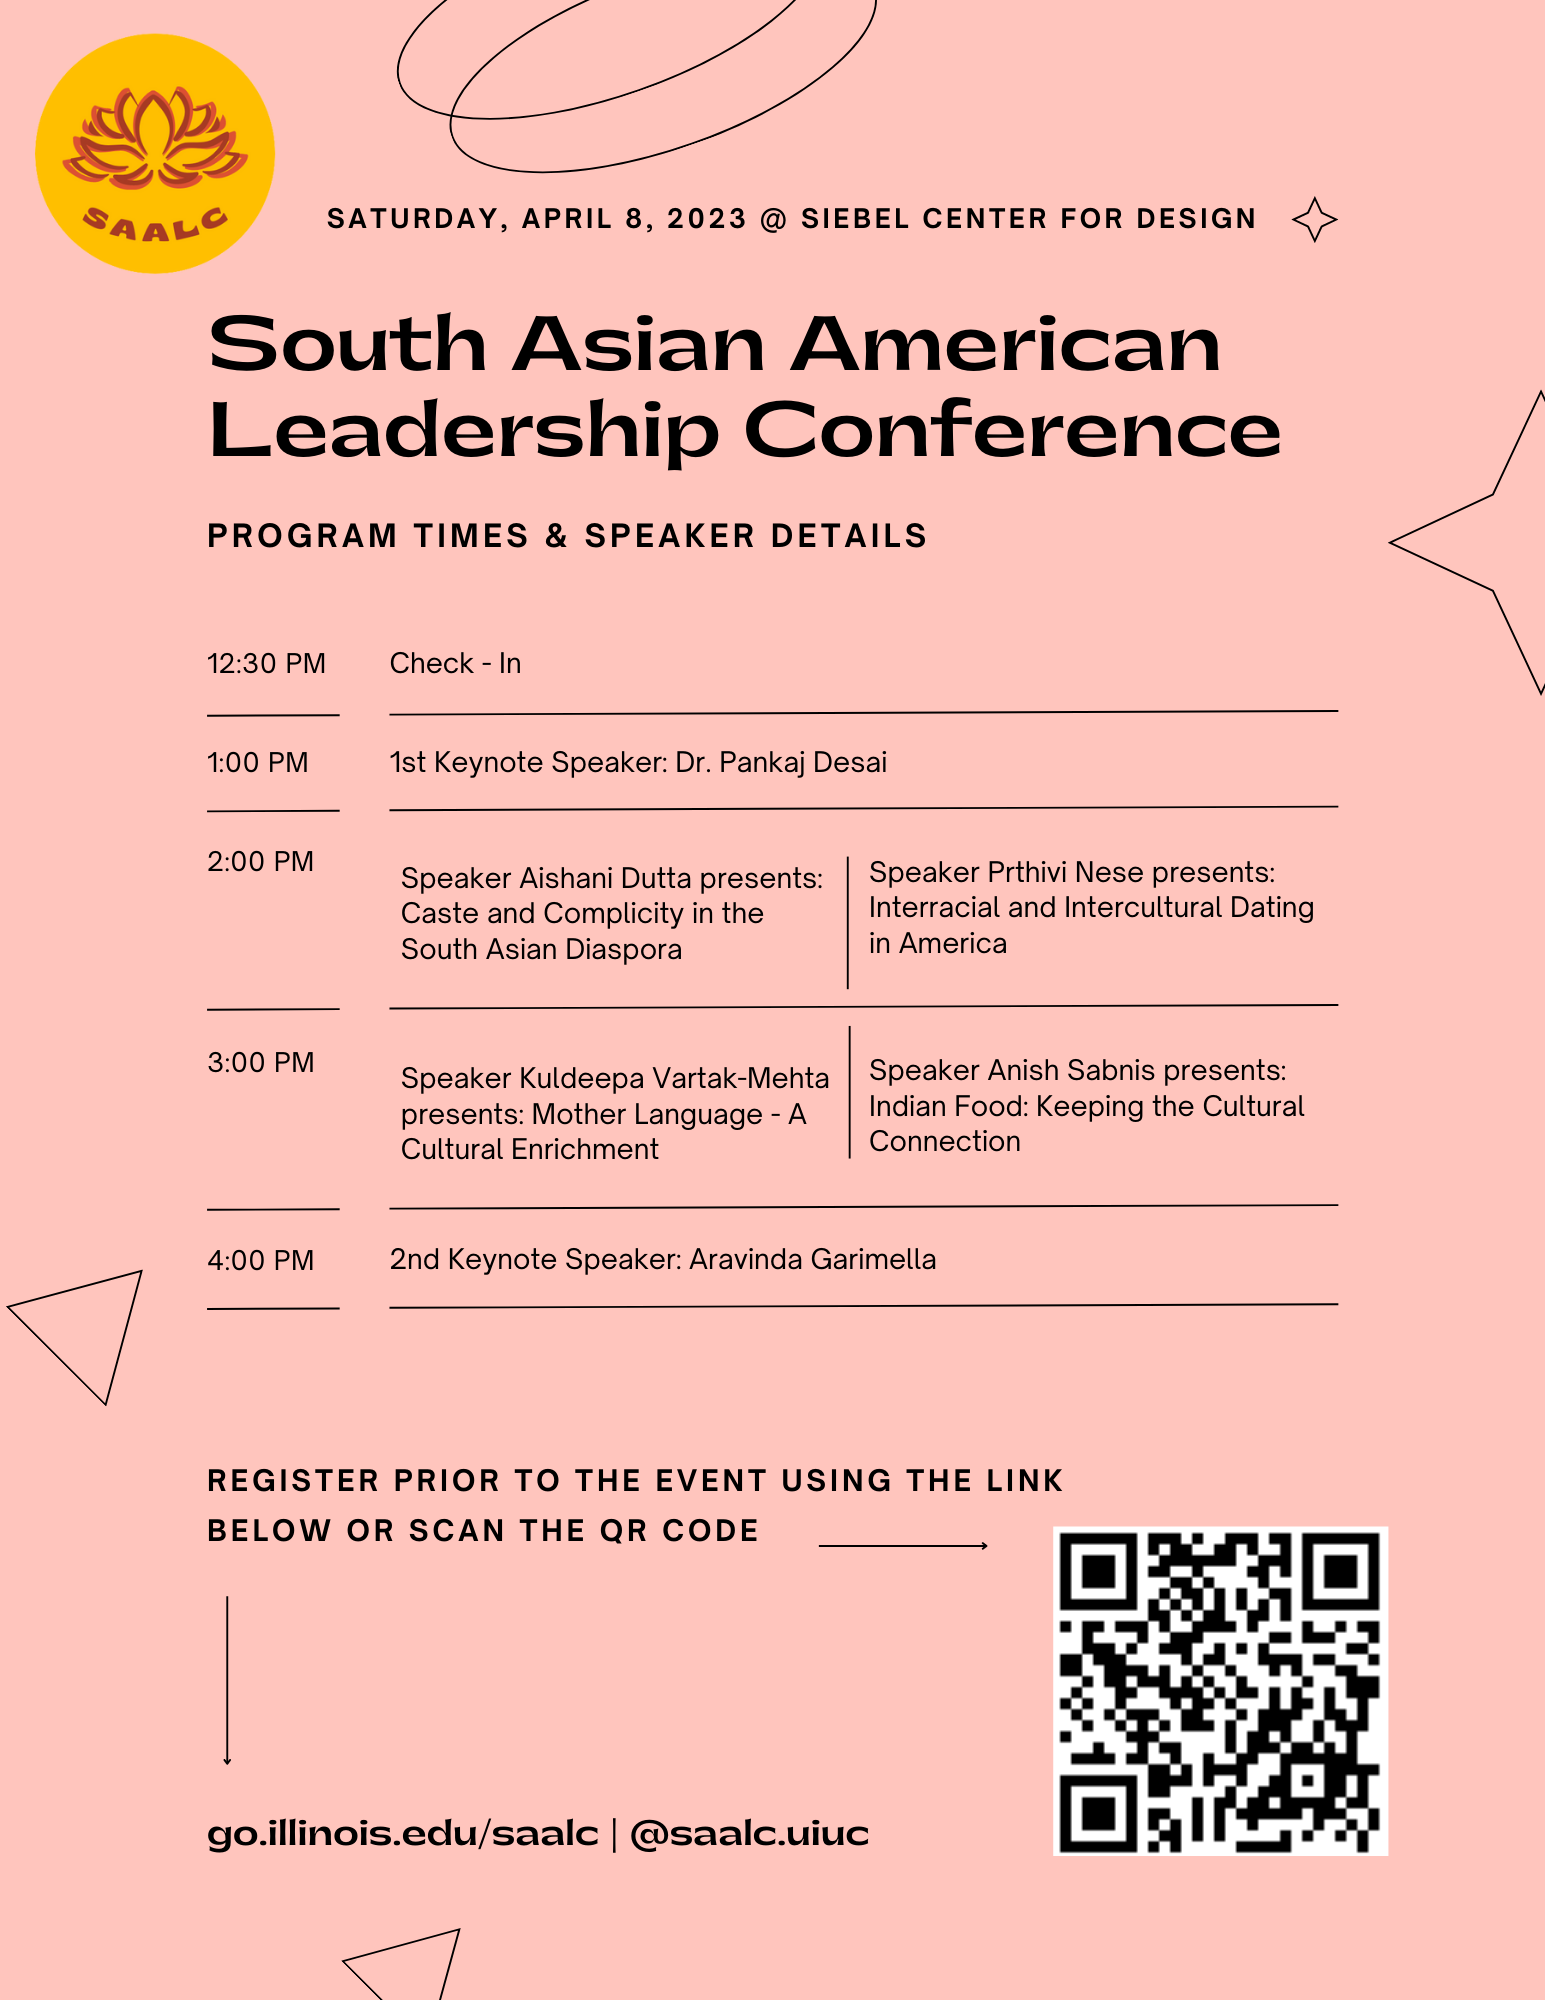 2023 SAALC Schedule poster featuring text about the conference on a salmon pink background with the yellow SAALC logo in the upper left